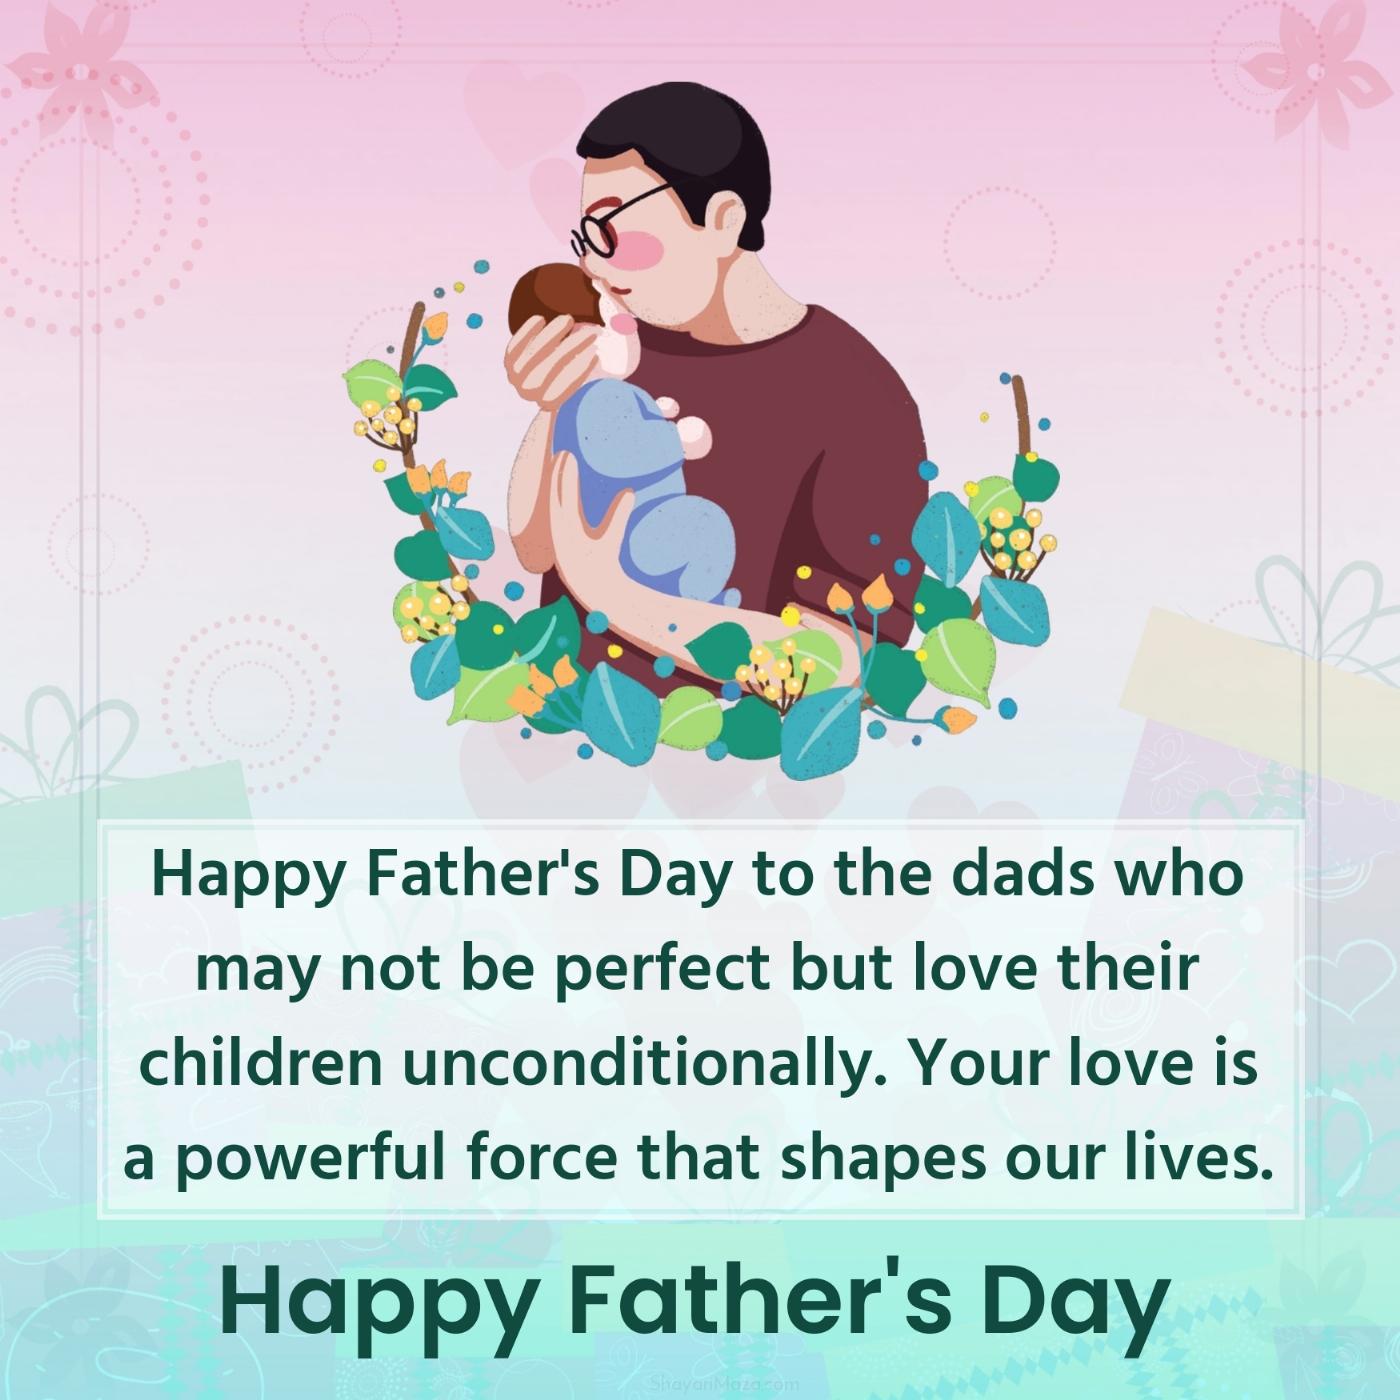 Happy Father's Day to the dads who may not be perfect but love their children